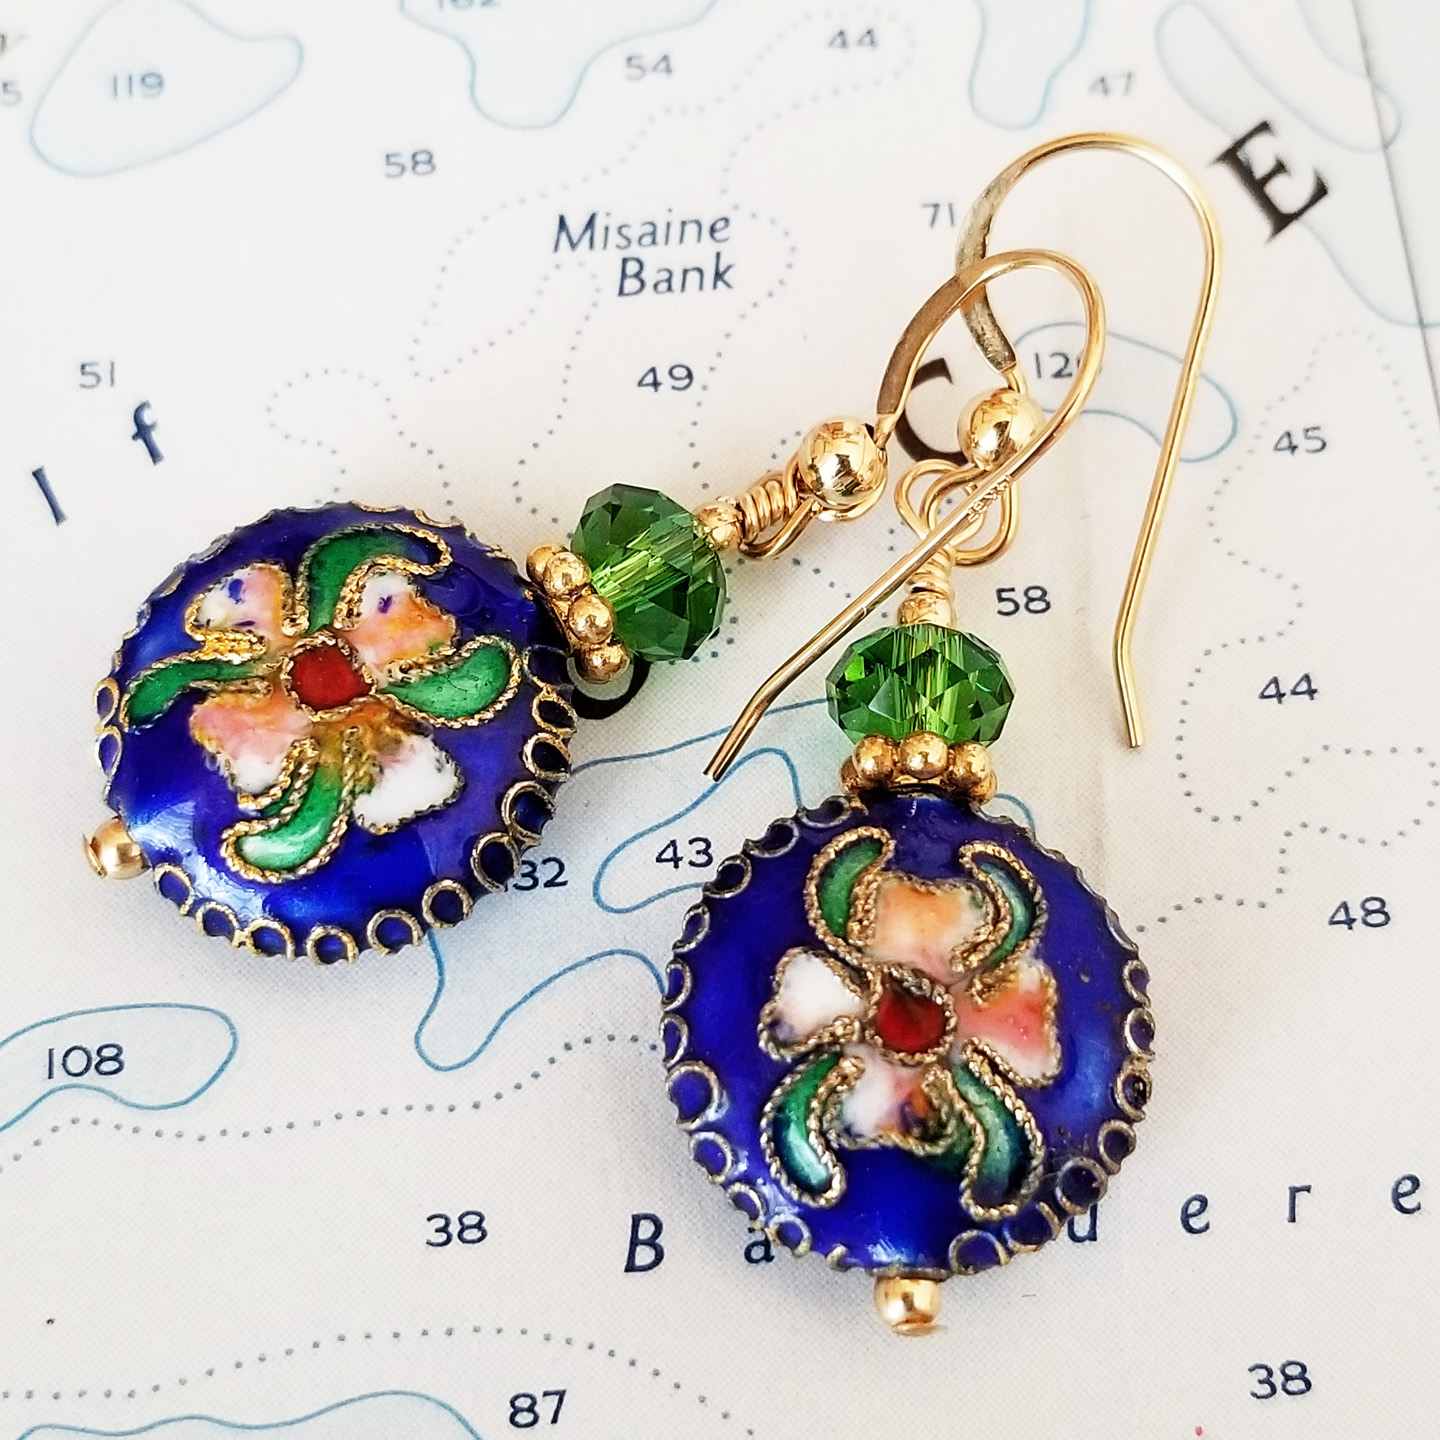 Blue Cloisonne, Crystal and Gold Earrings